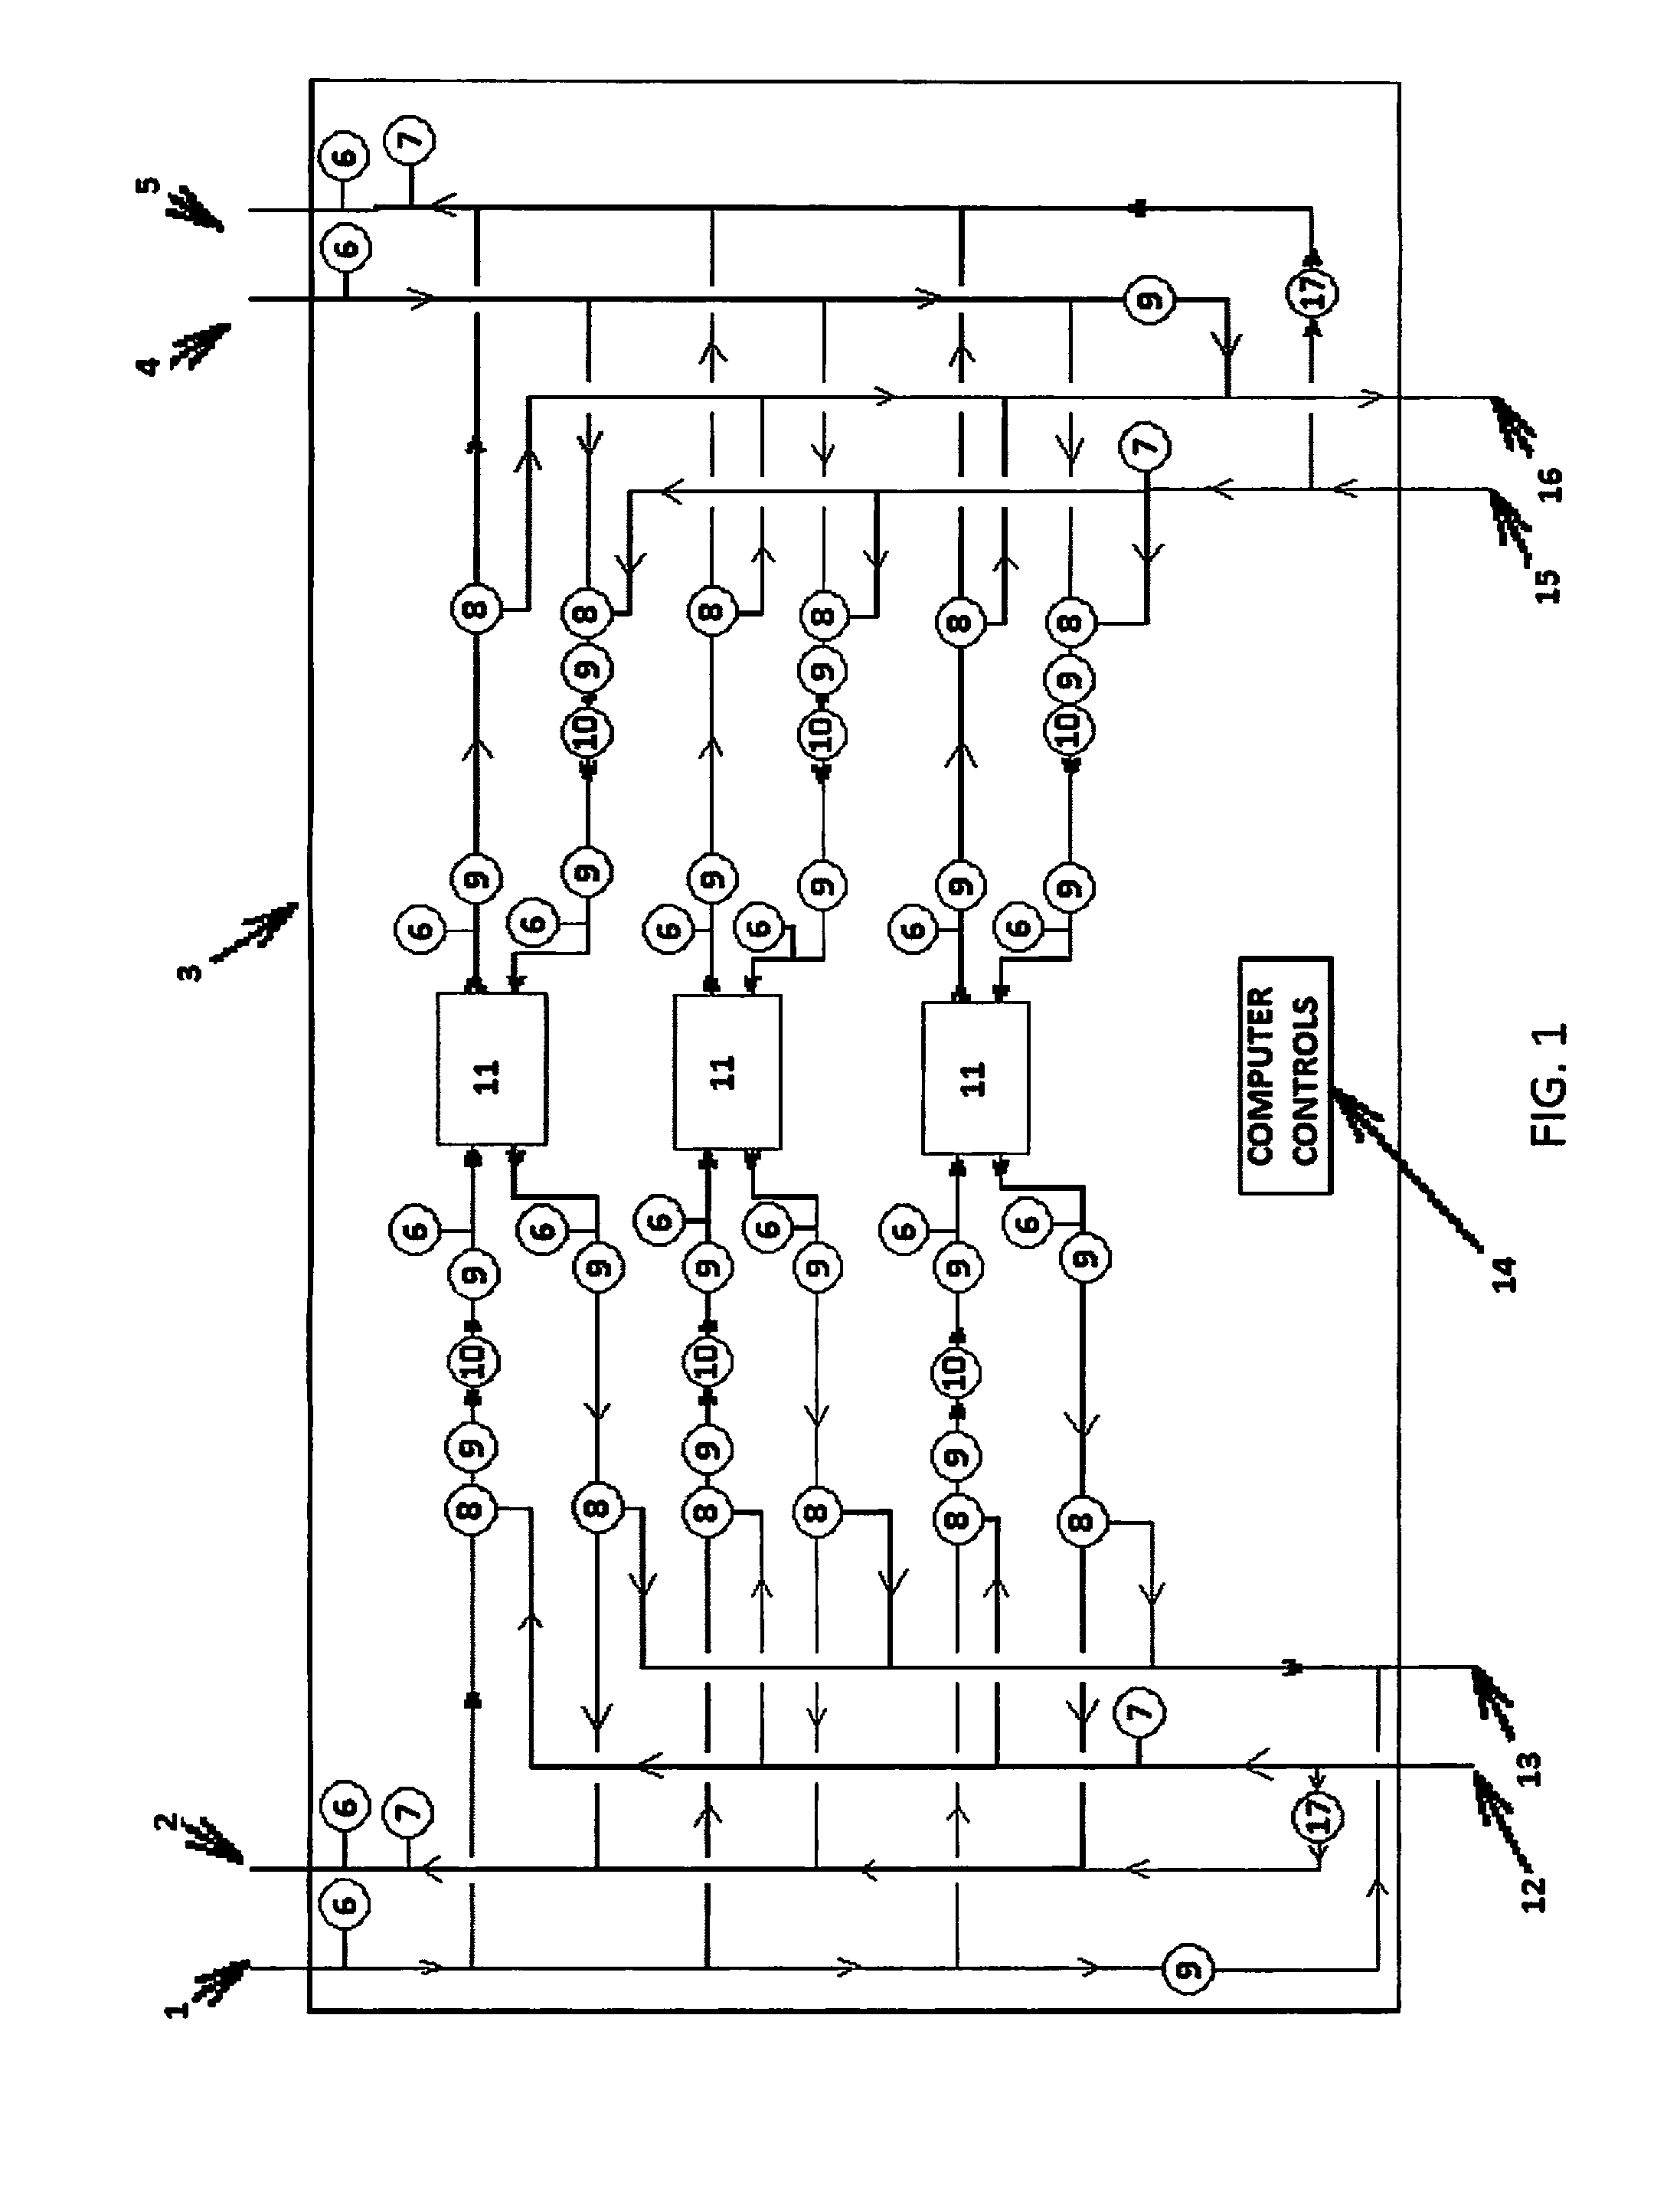 Energy Chassis and Energy Exchange Device